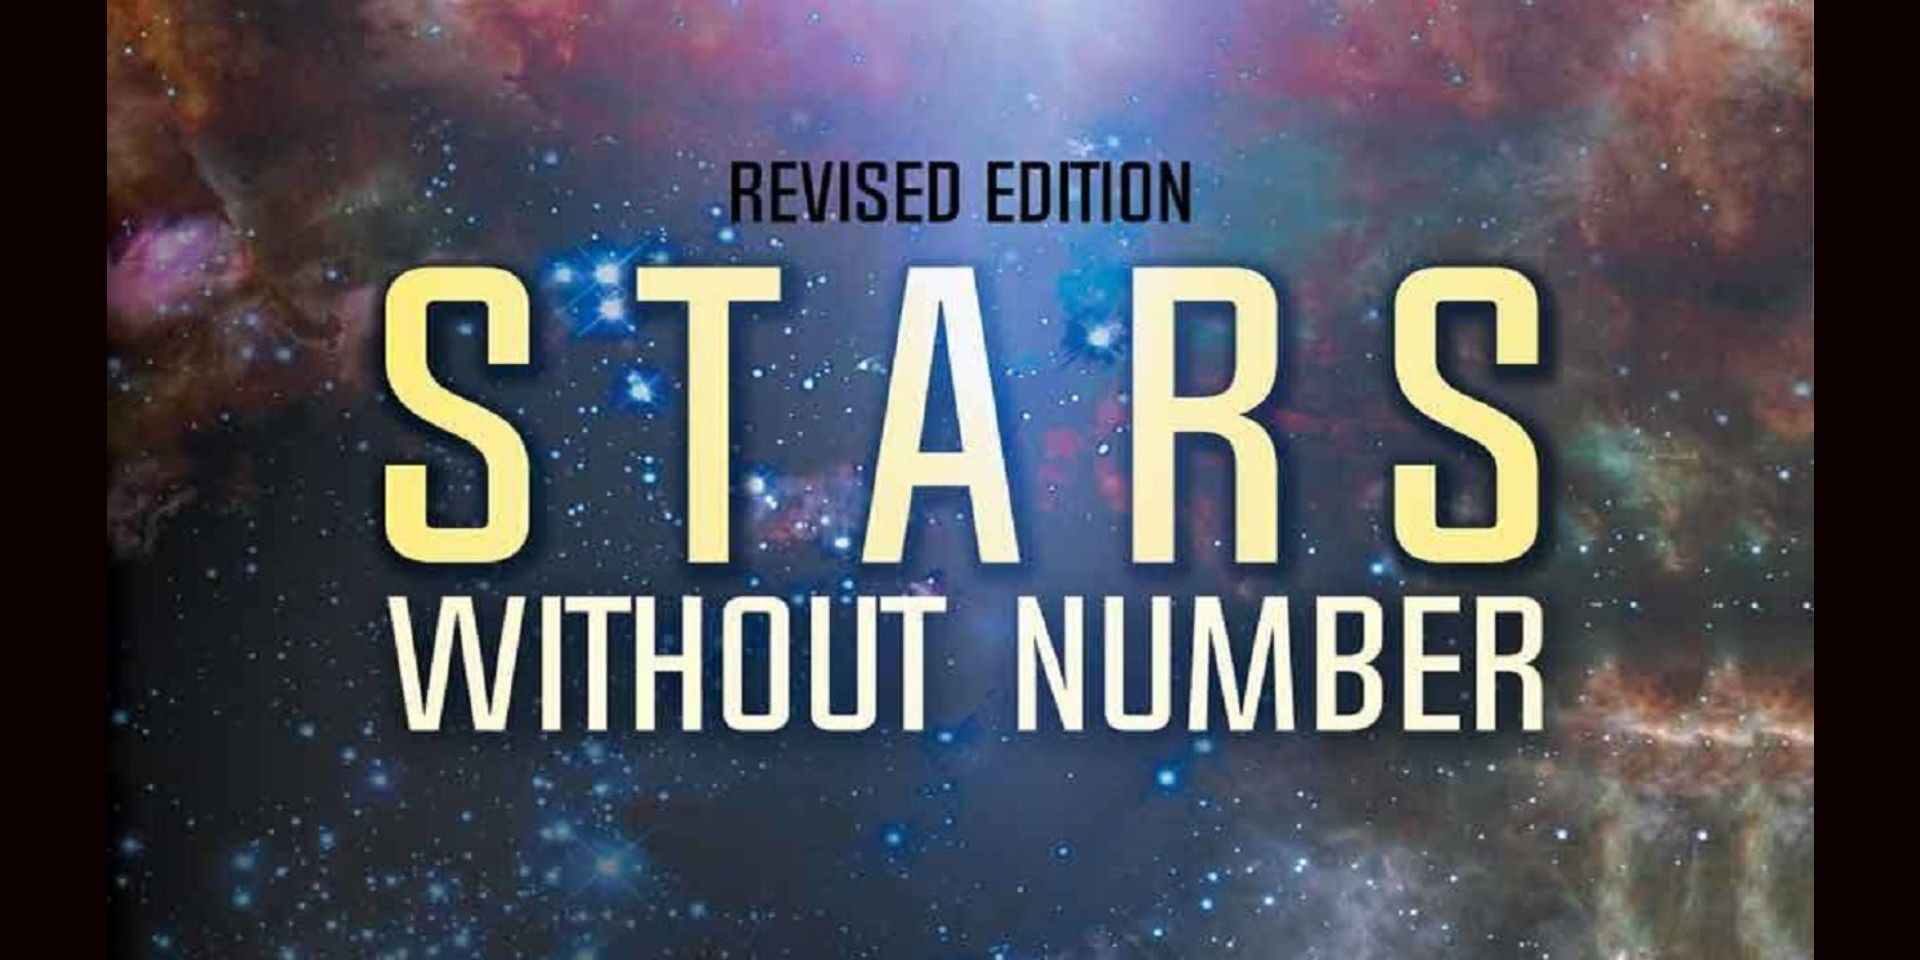 Stars Without Number Star Wars-Inspired RPG